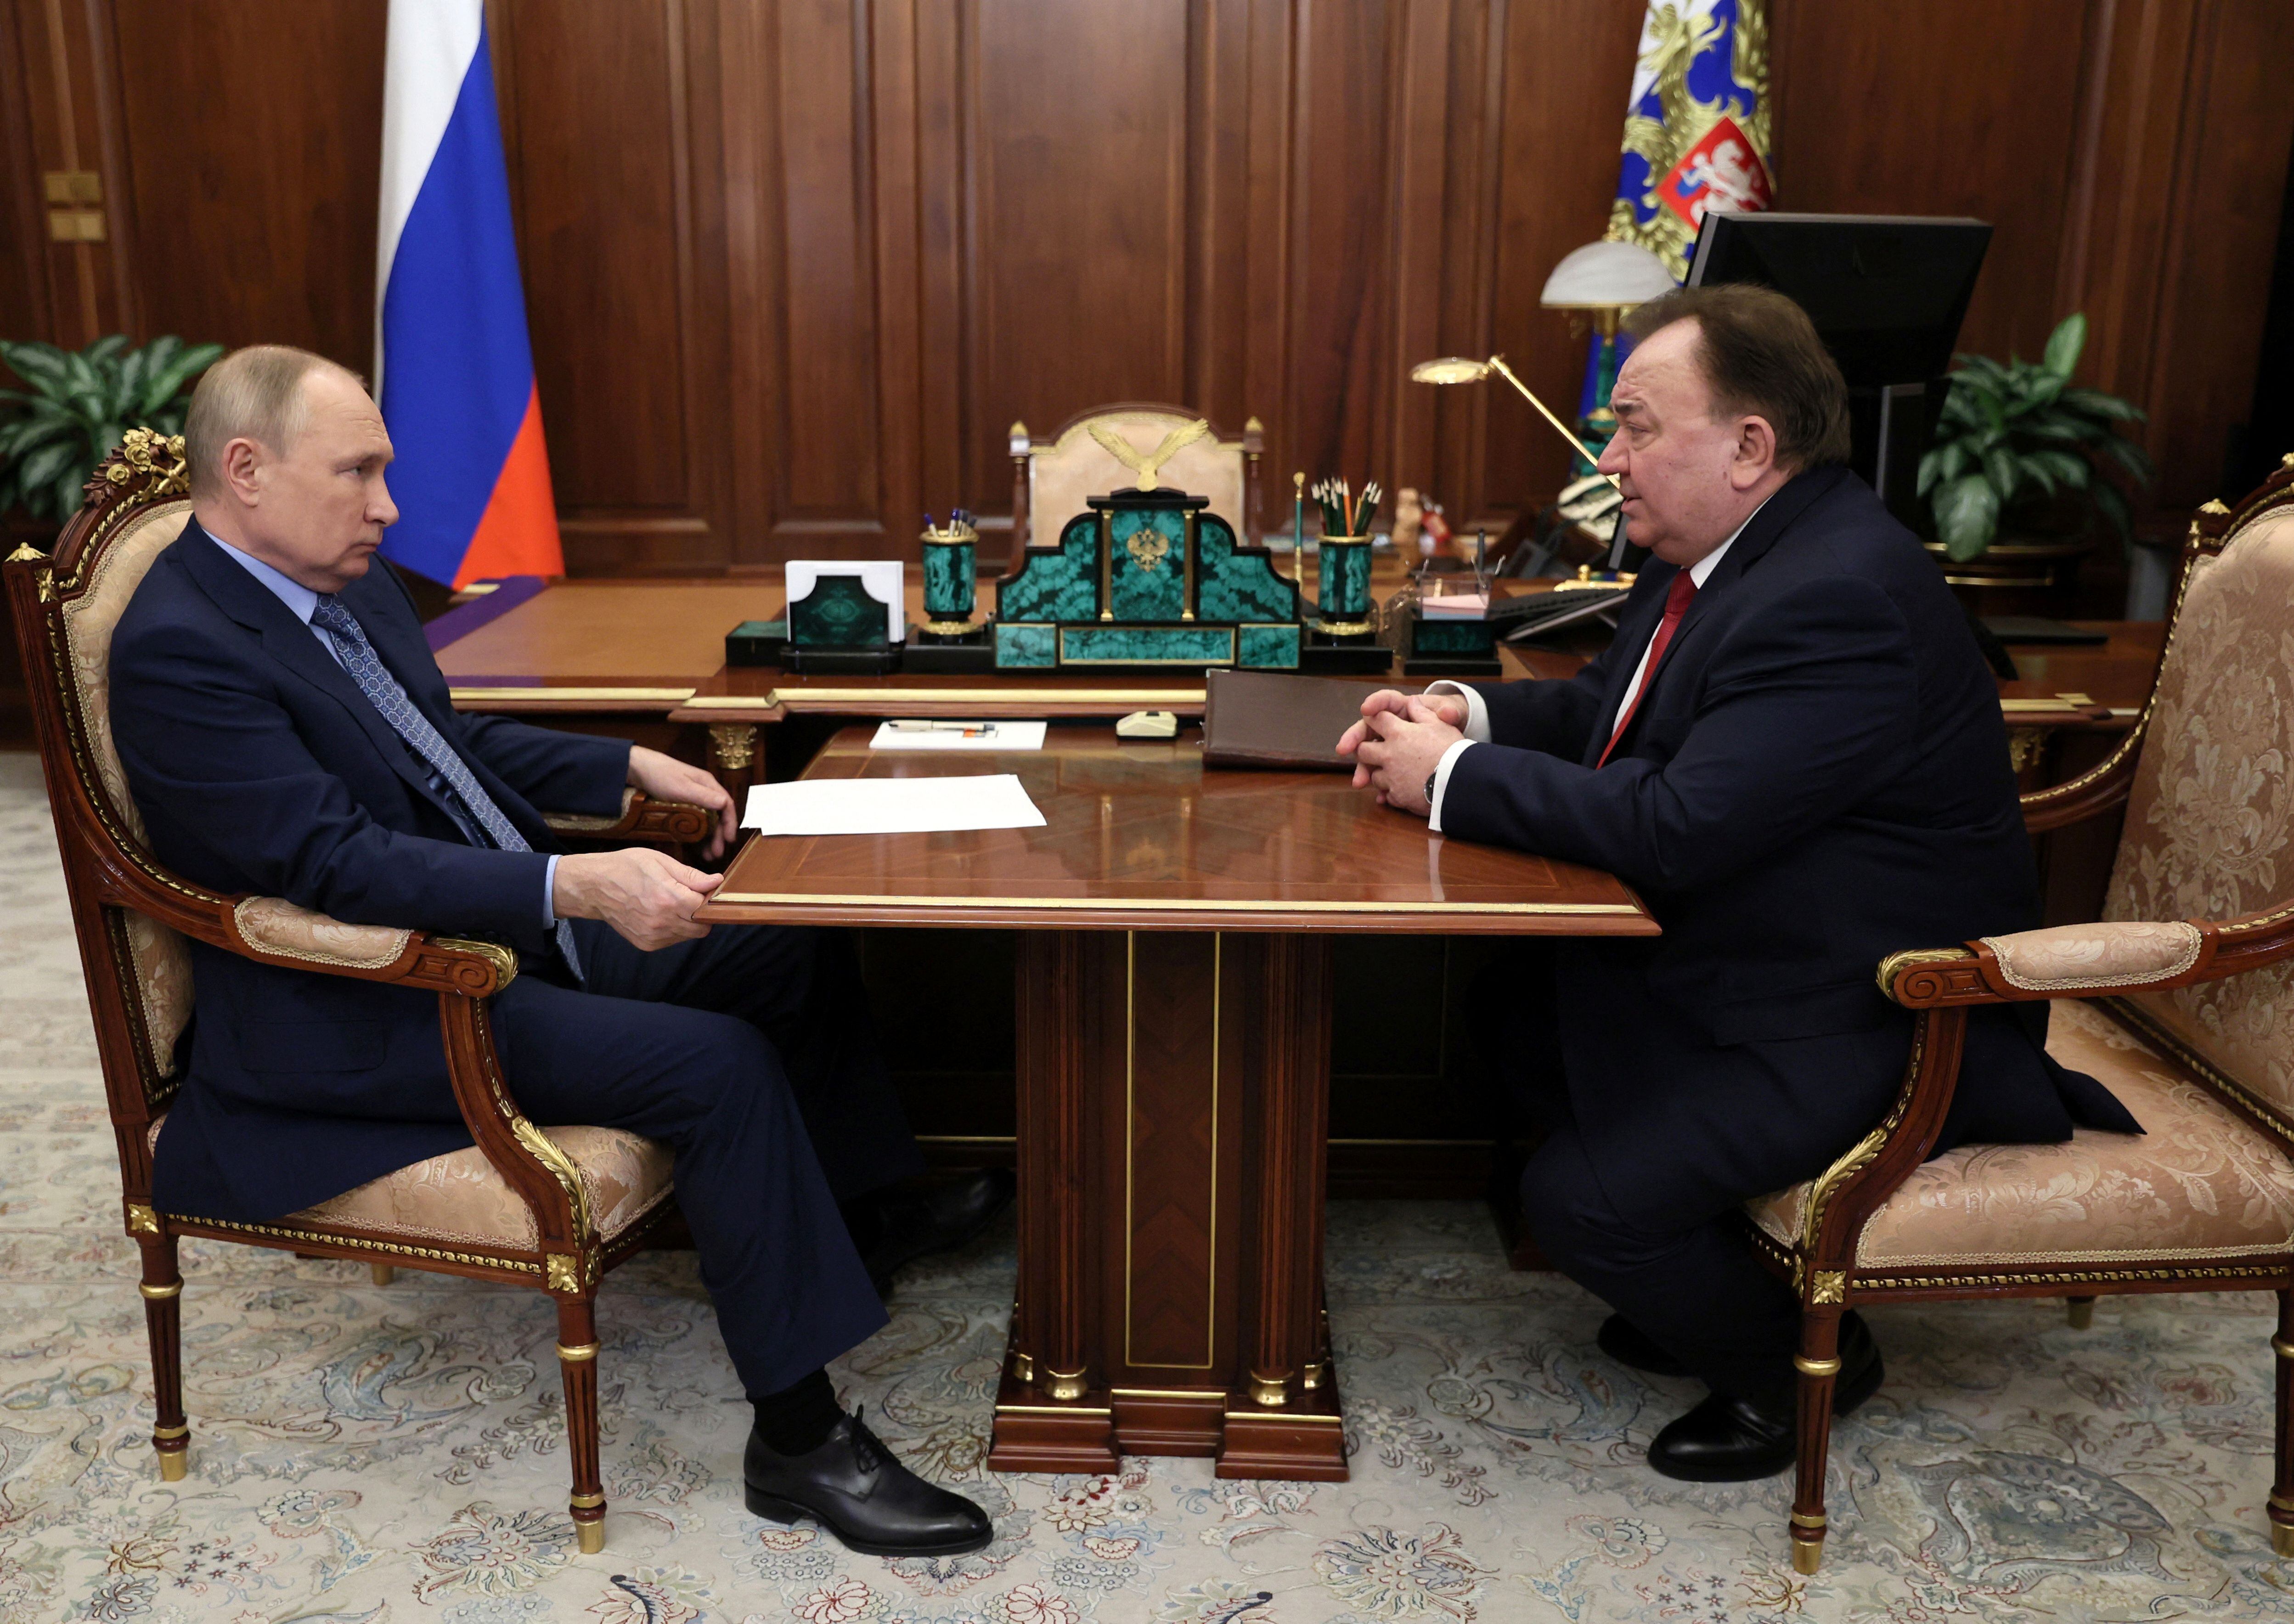 Russian President Vladimir Putin attends a meeting with the head of the Republic of Ingushetia Makhmud-Ali Kalimatov at the Kremlin in Moscow, Russia March 30, 2022. Sputnik/Mikhail Klimentyev/Kremlin via REUTERS ATTENTION EDITORS - THIS IMAGE WAS PROVIDED BY A THIRD PARTY.